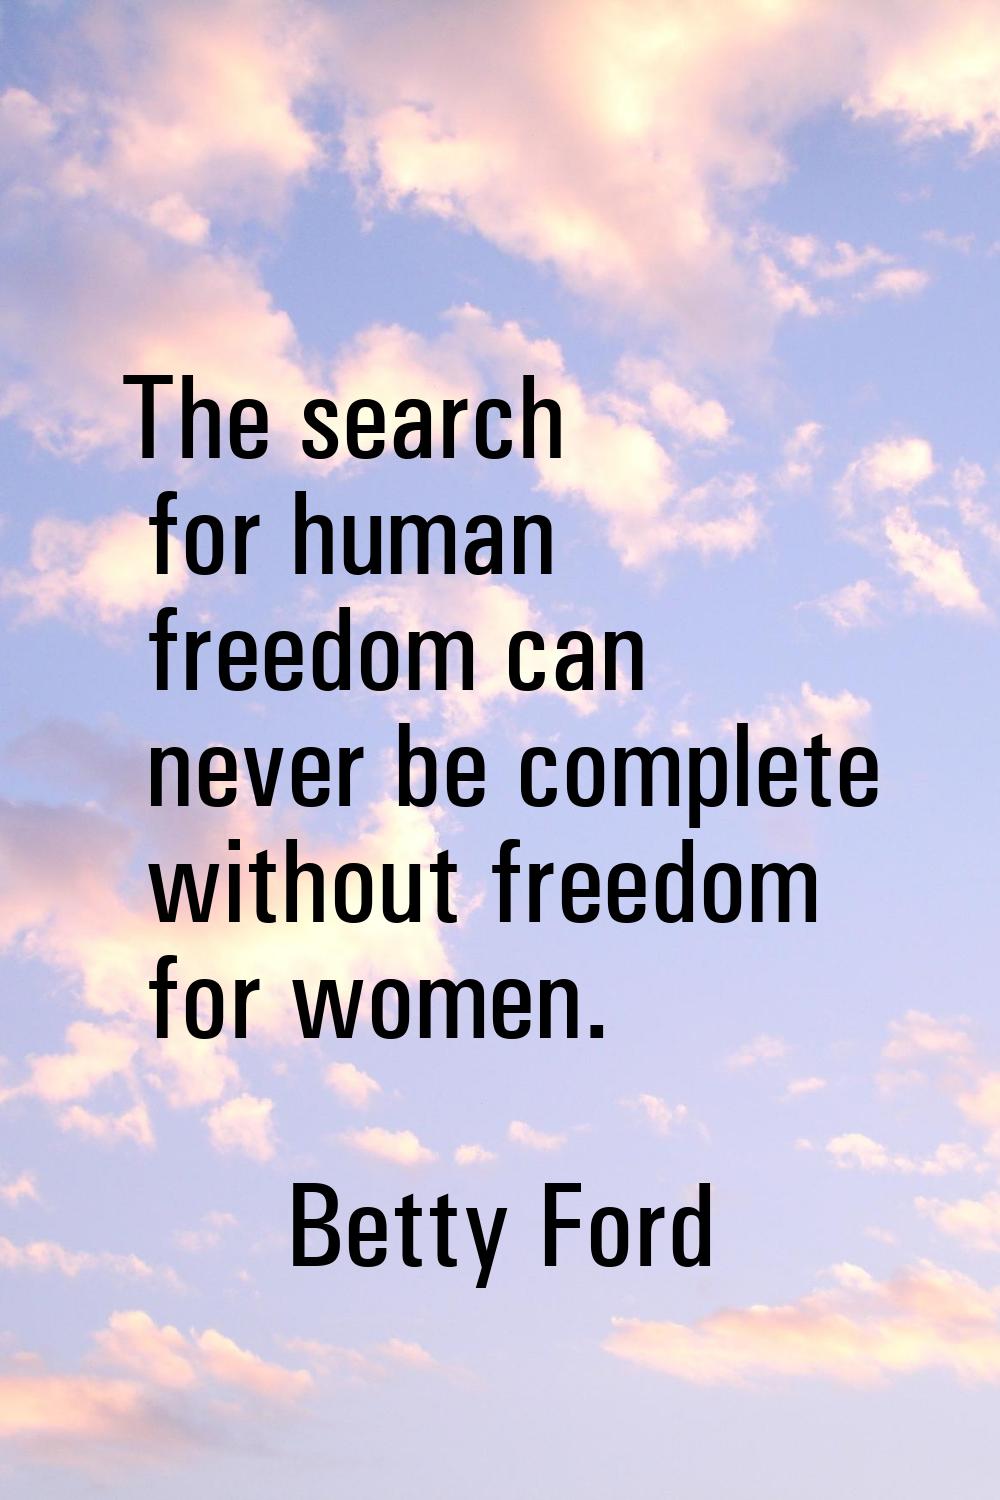 The search for human freedom can never be complete without freedom for women.